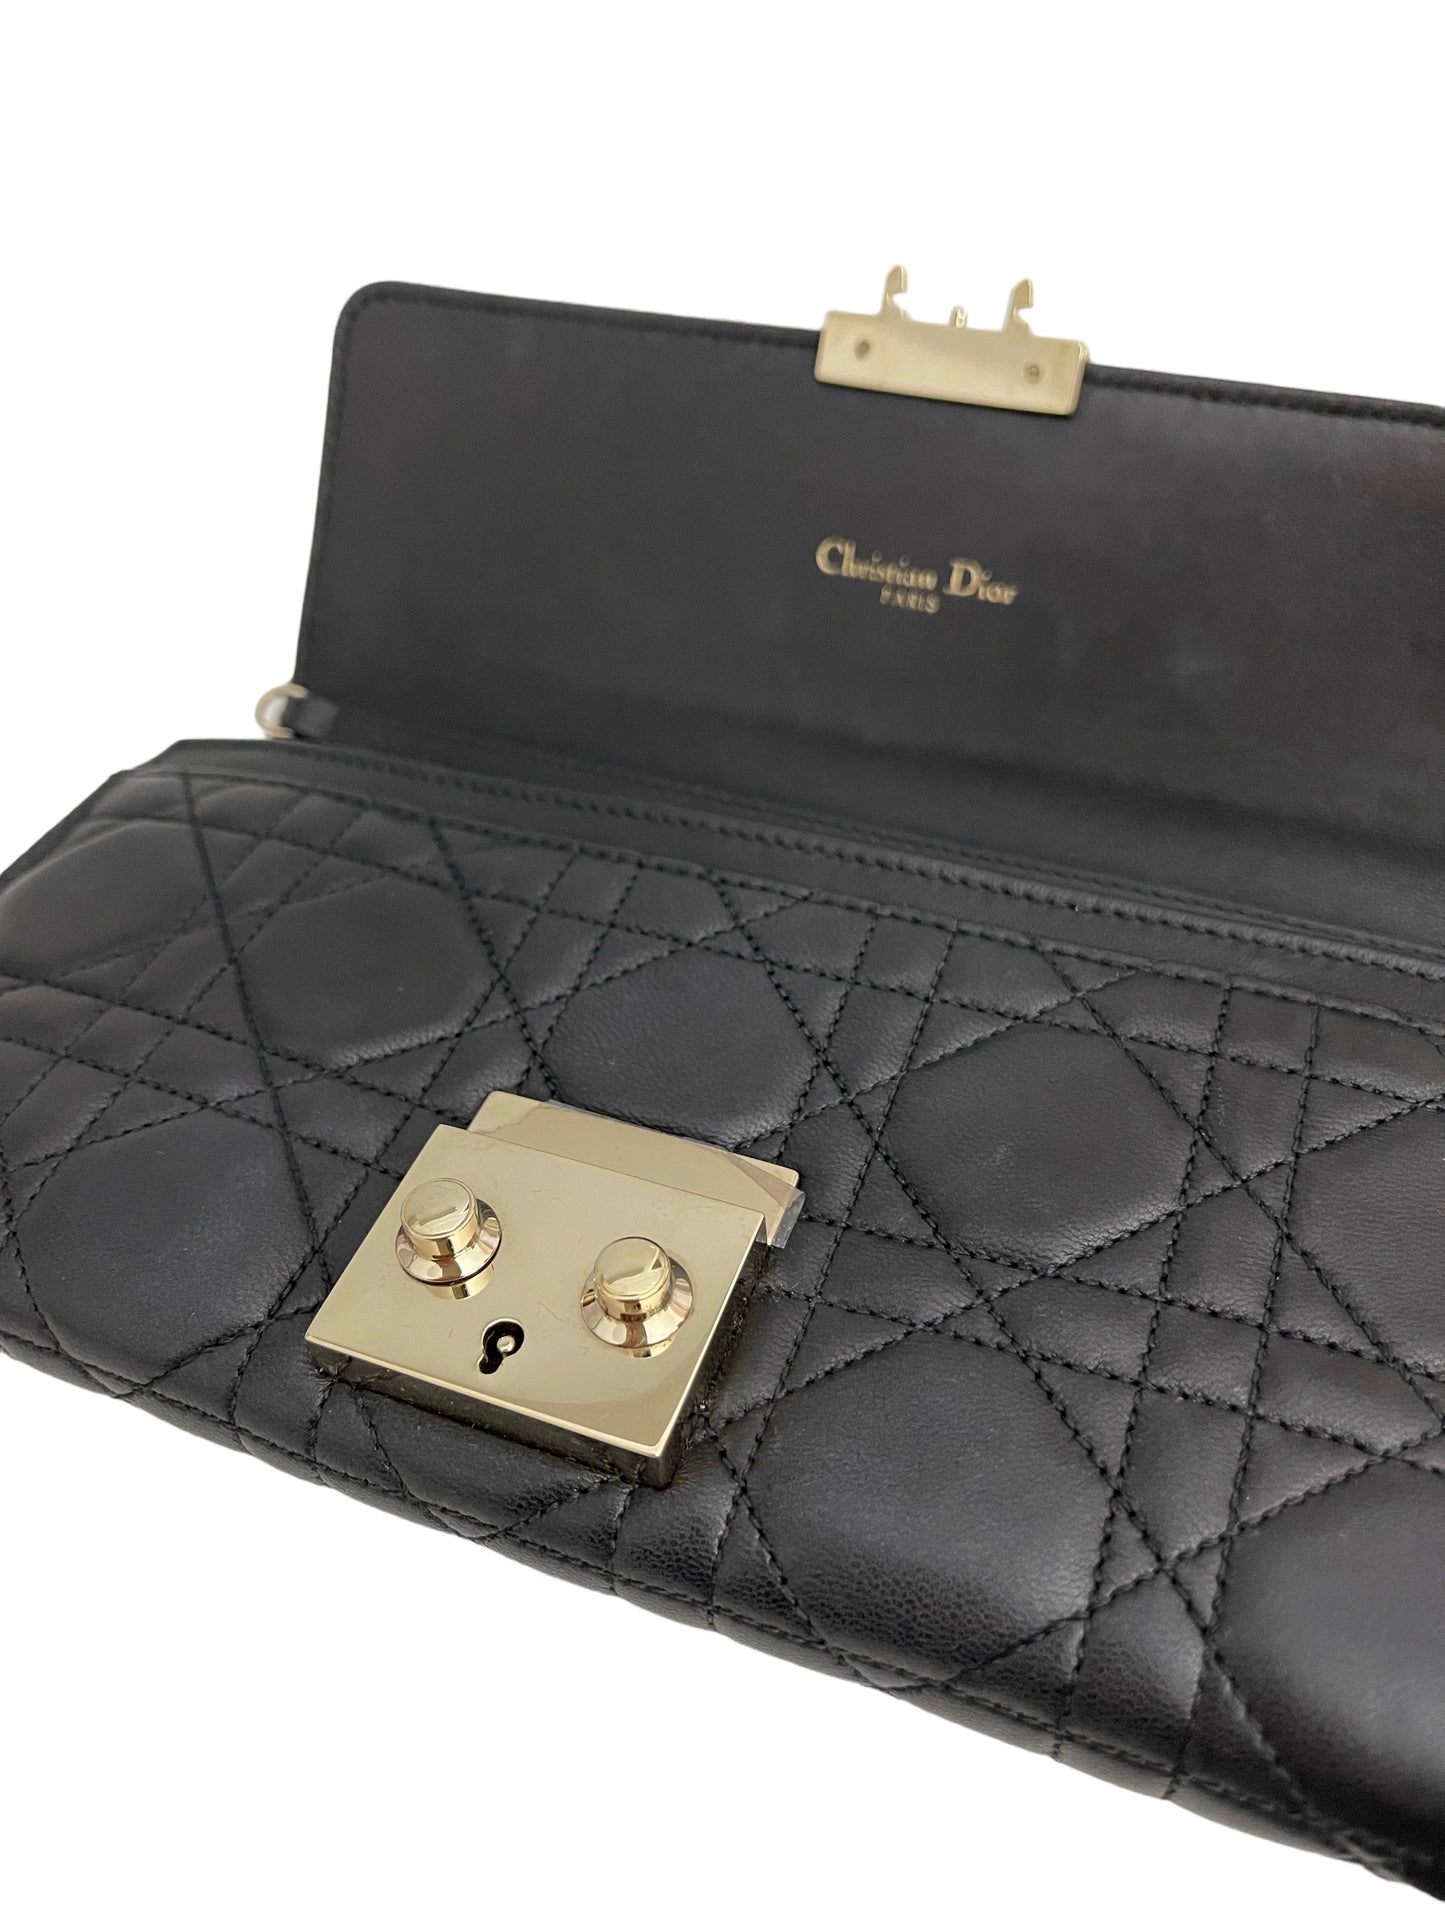 ￼Christian Dior Miss Dior Rendezvous-Vour Chain Wallet